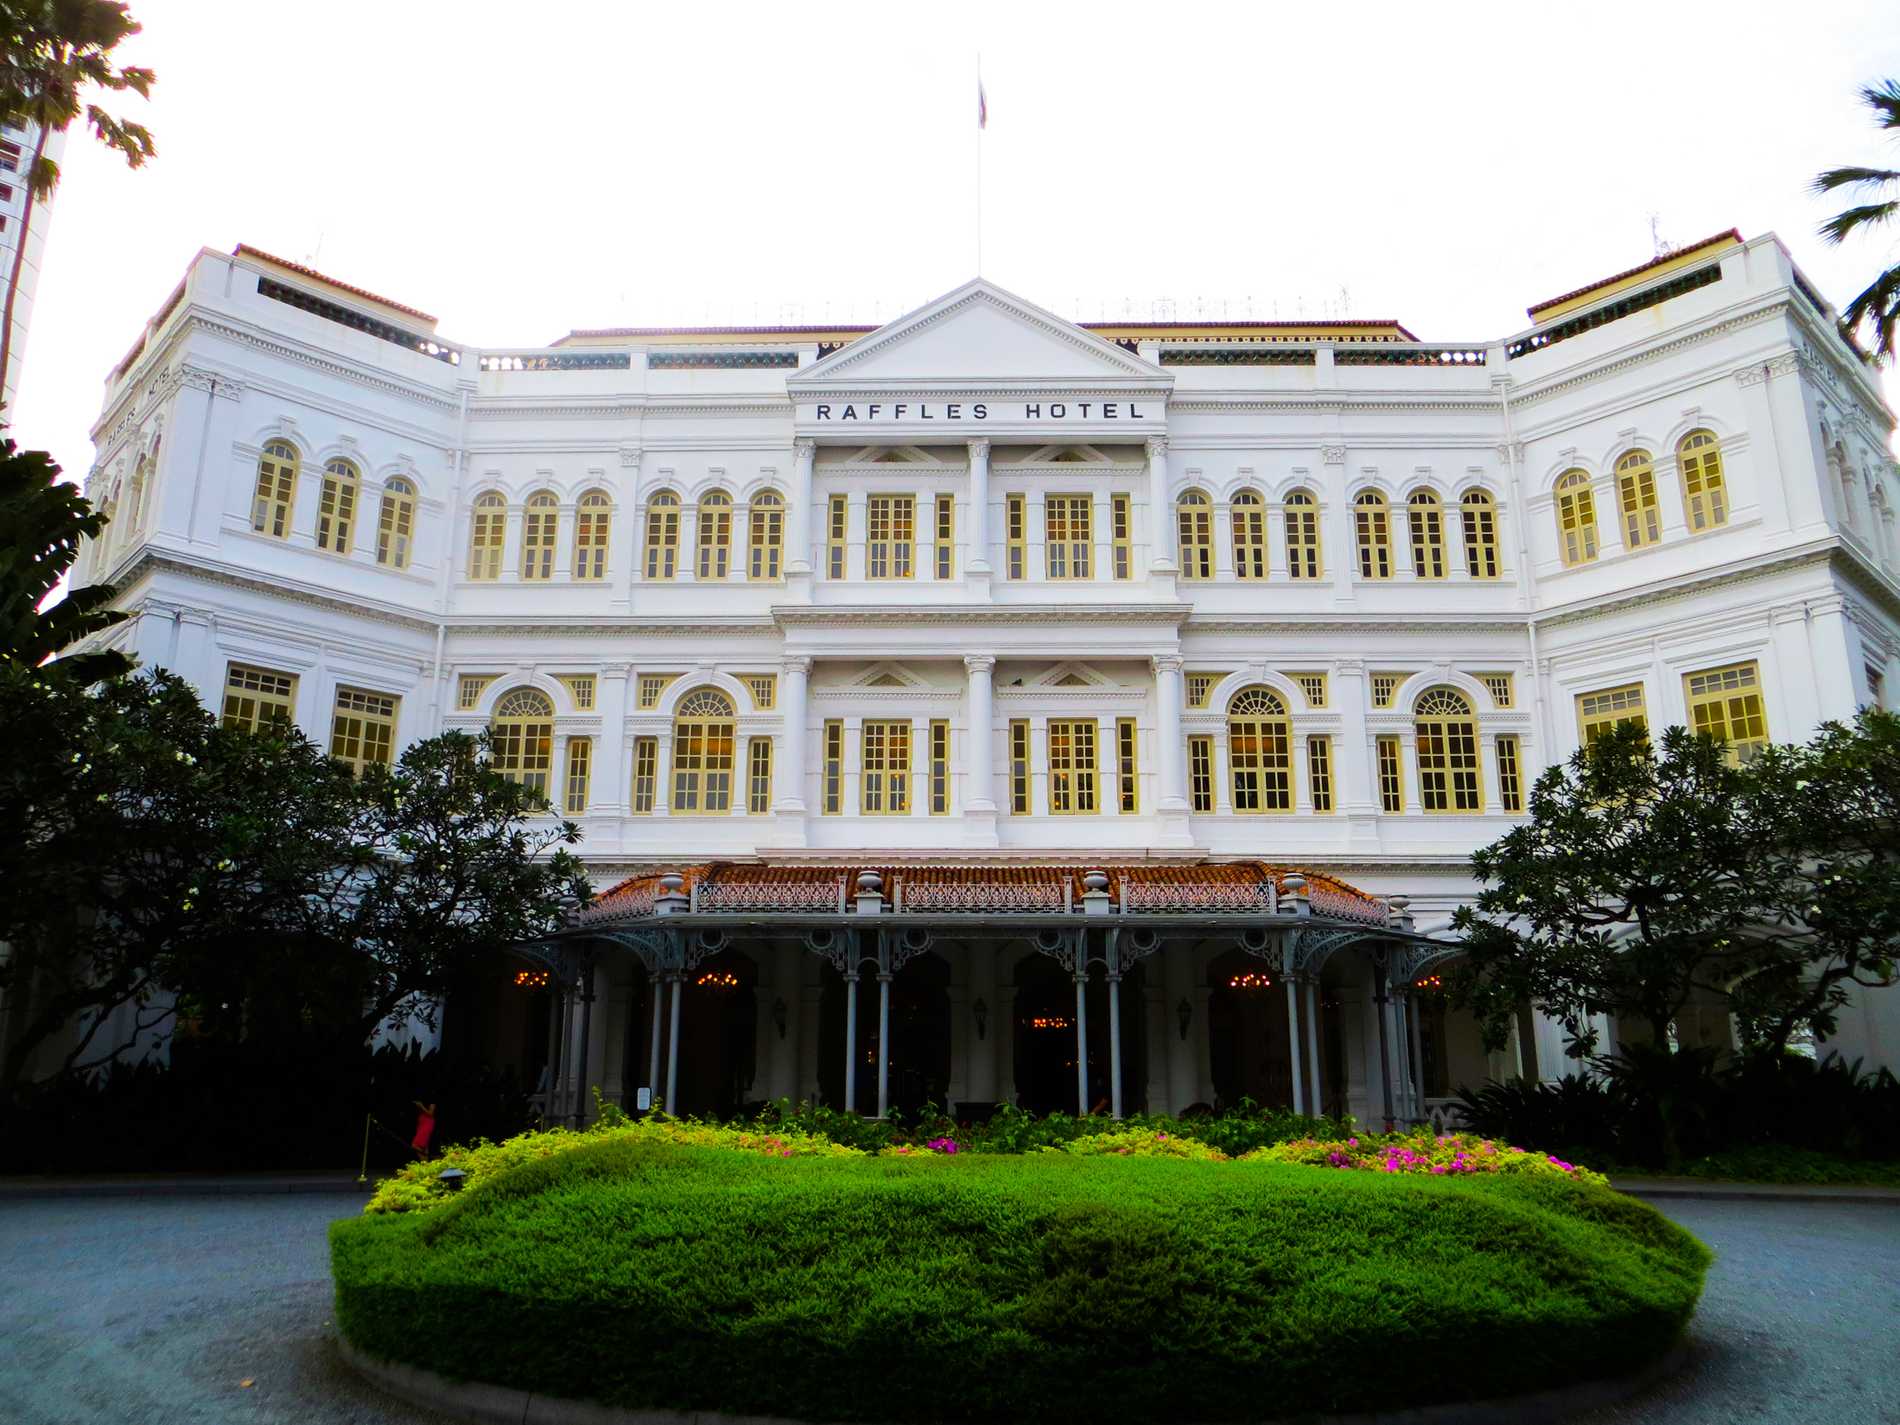 The bright white, colonial-style façade and entrance to Raffles Hotel.